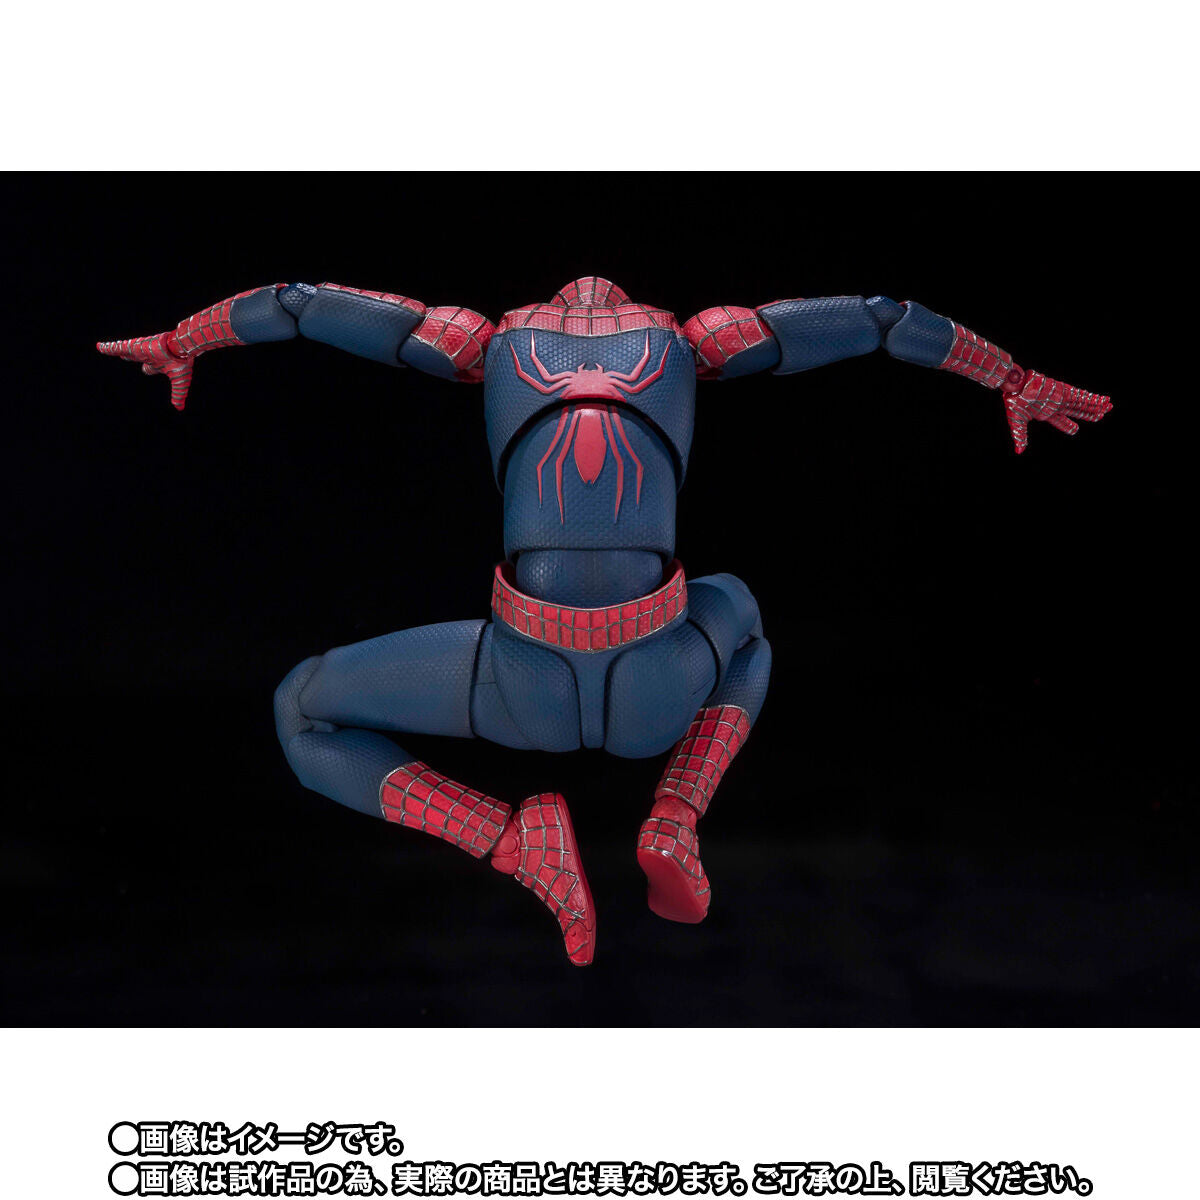 Bandai - S.H.Figuarts - Spider-Man: No Way Home - The Friendly Neighborhood Spider-Man - Marvelous Toys